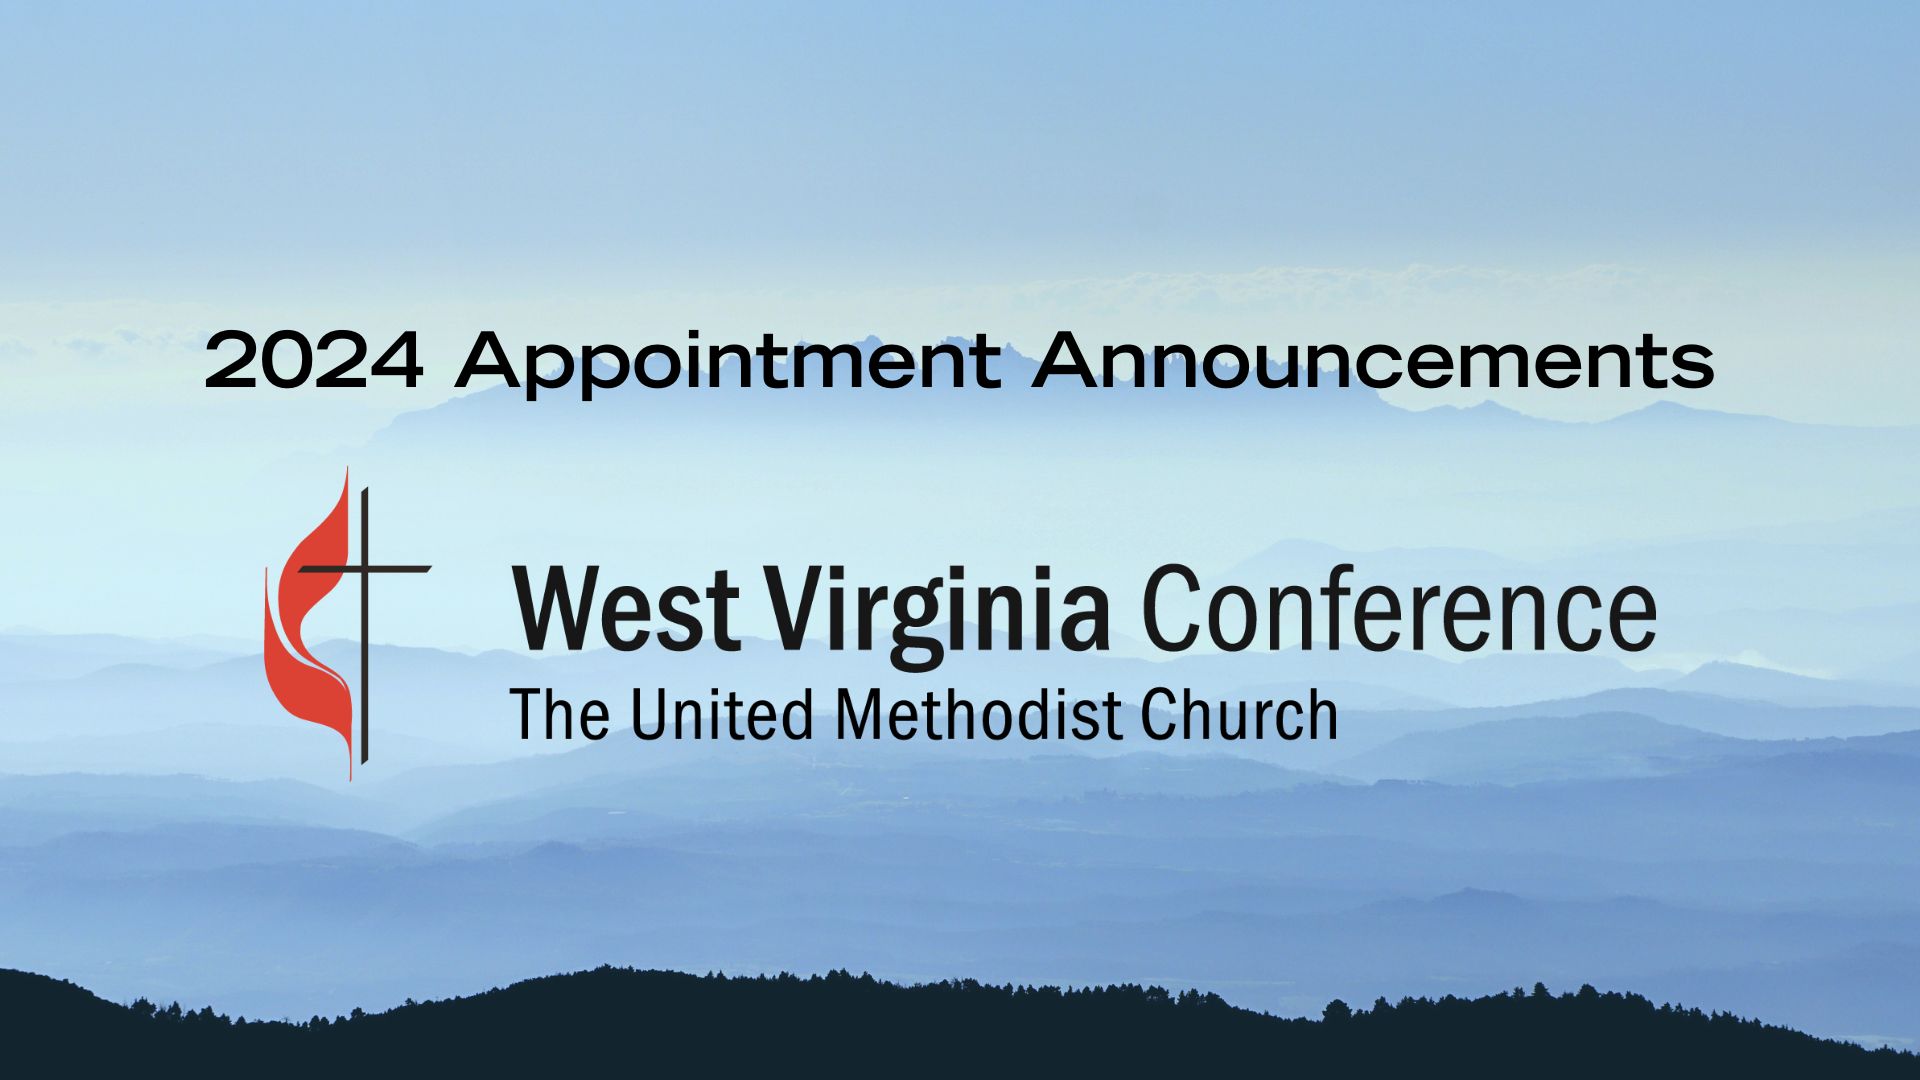 2024 Appointment Announcements West Virginia Conference of the United